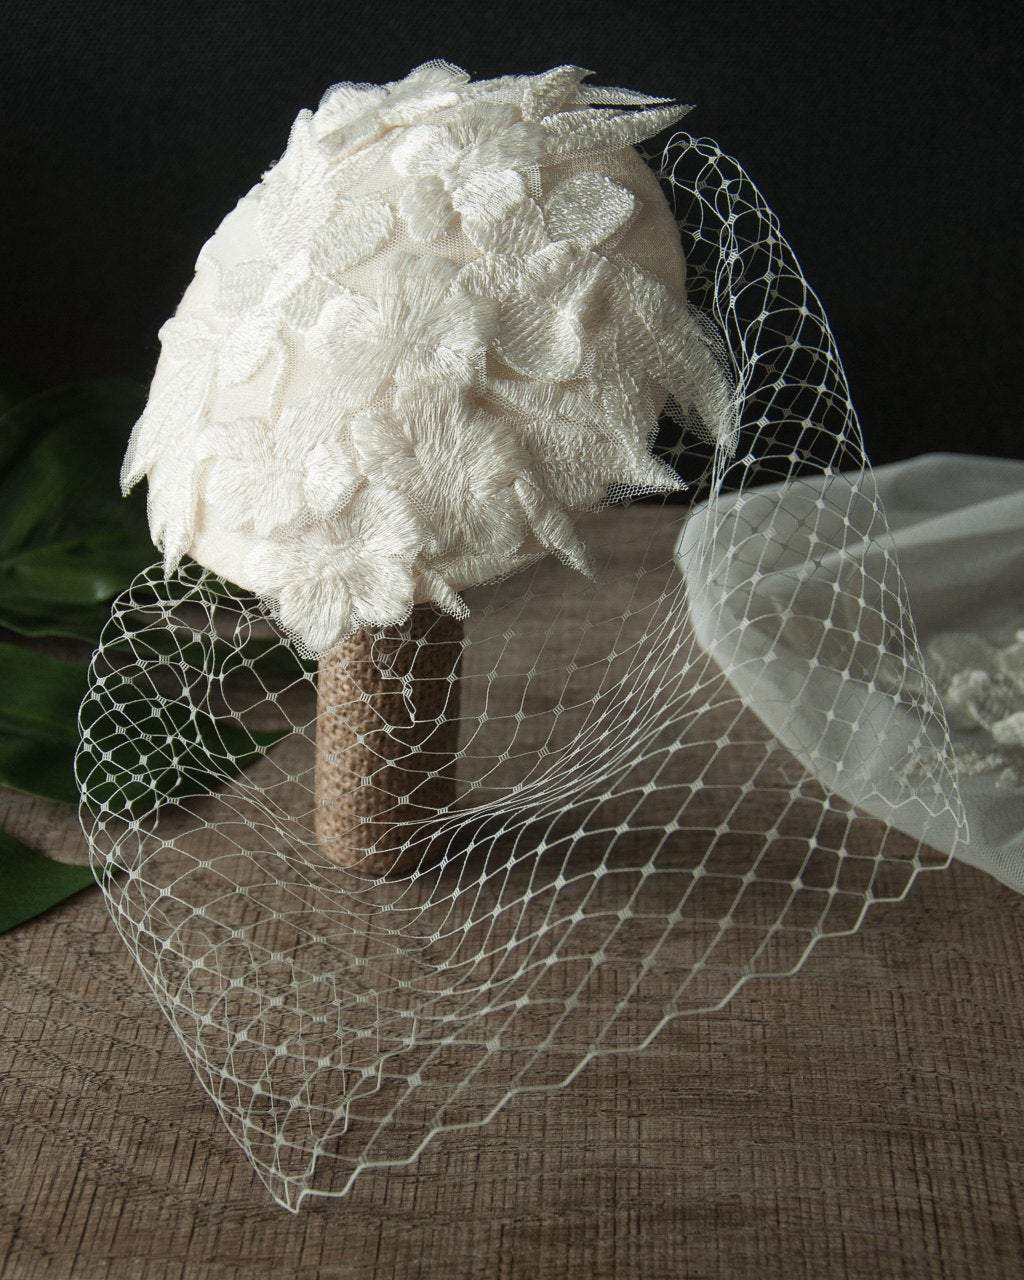 BIRDCAGE - BRIDAL VEIL FASCINATOR COVERED WITH LACE IN OFF WHITE, CREME OR IVORY COLOUR © Seegang Berlin